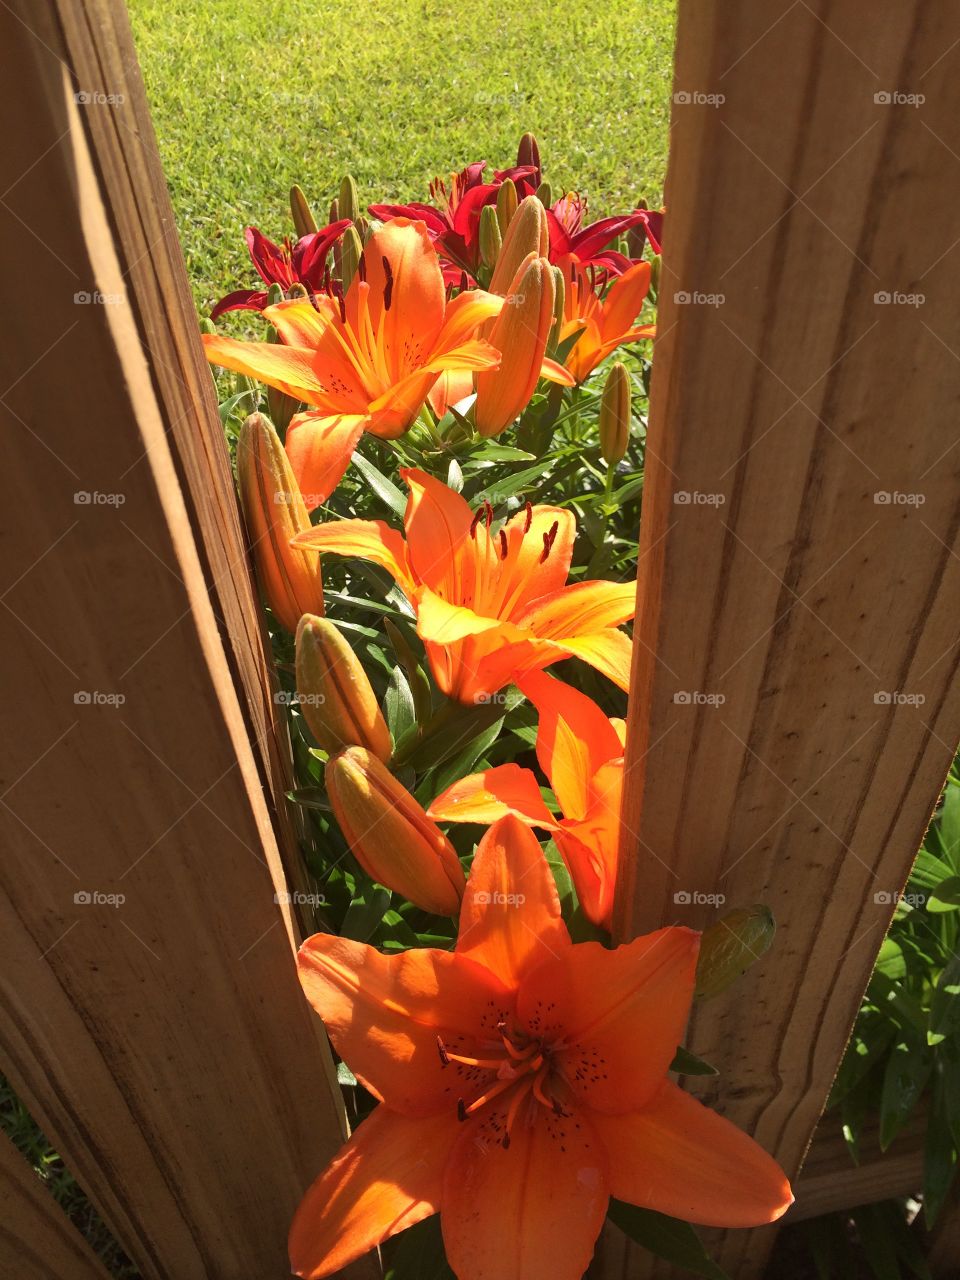 Lilies Through the Fence